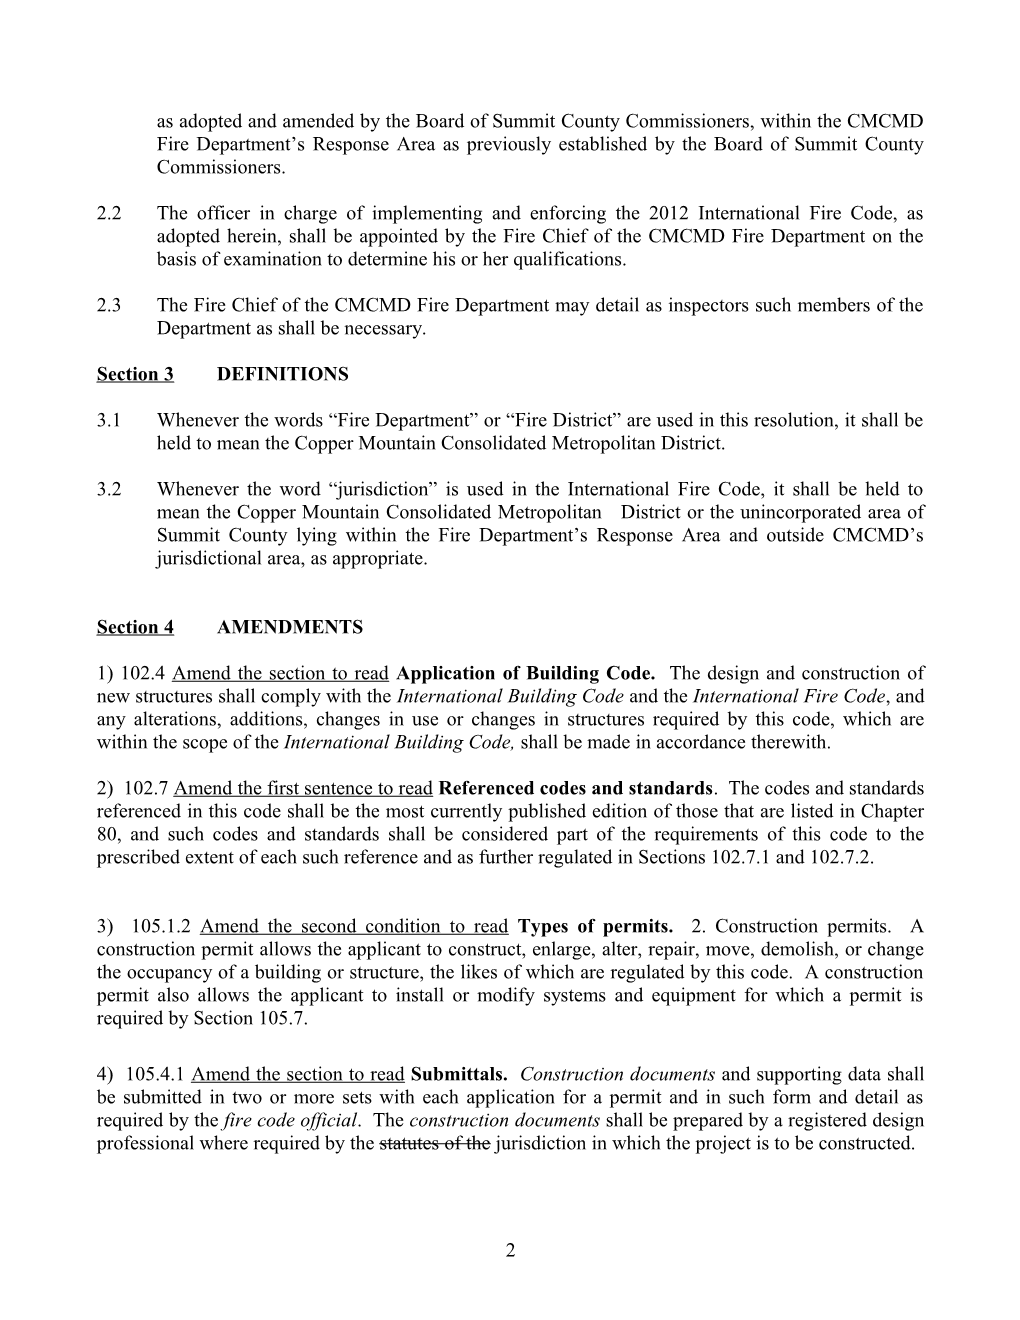 Information Packet for BOCC Consideration of the 2000 International Fire Code with Amendments